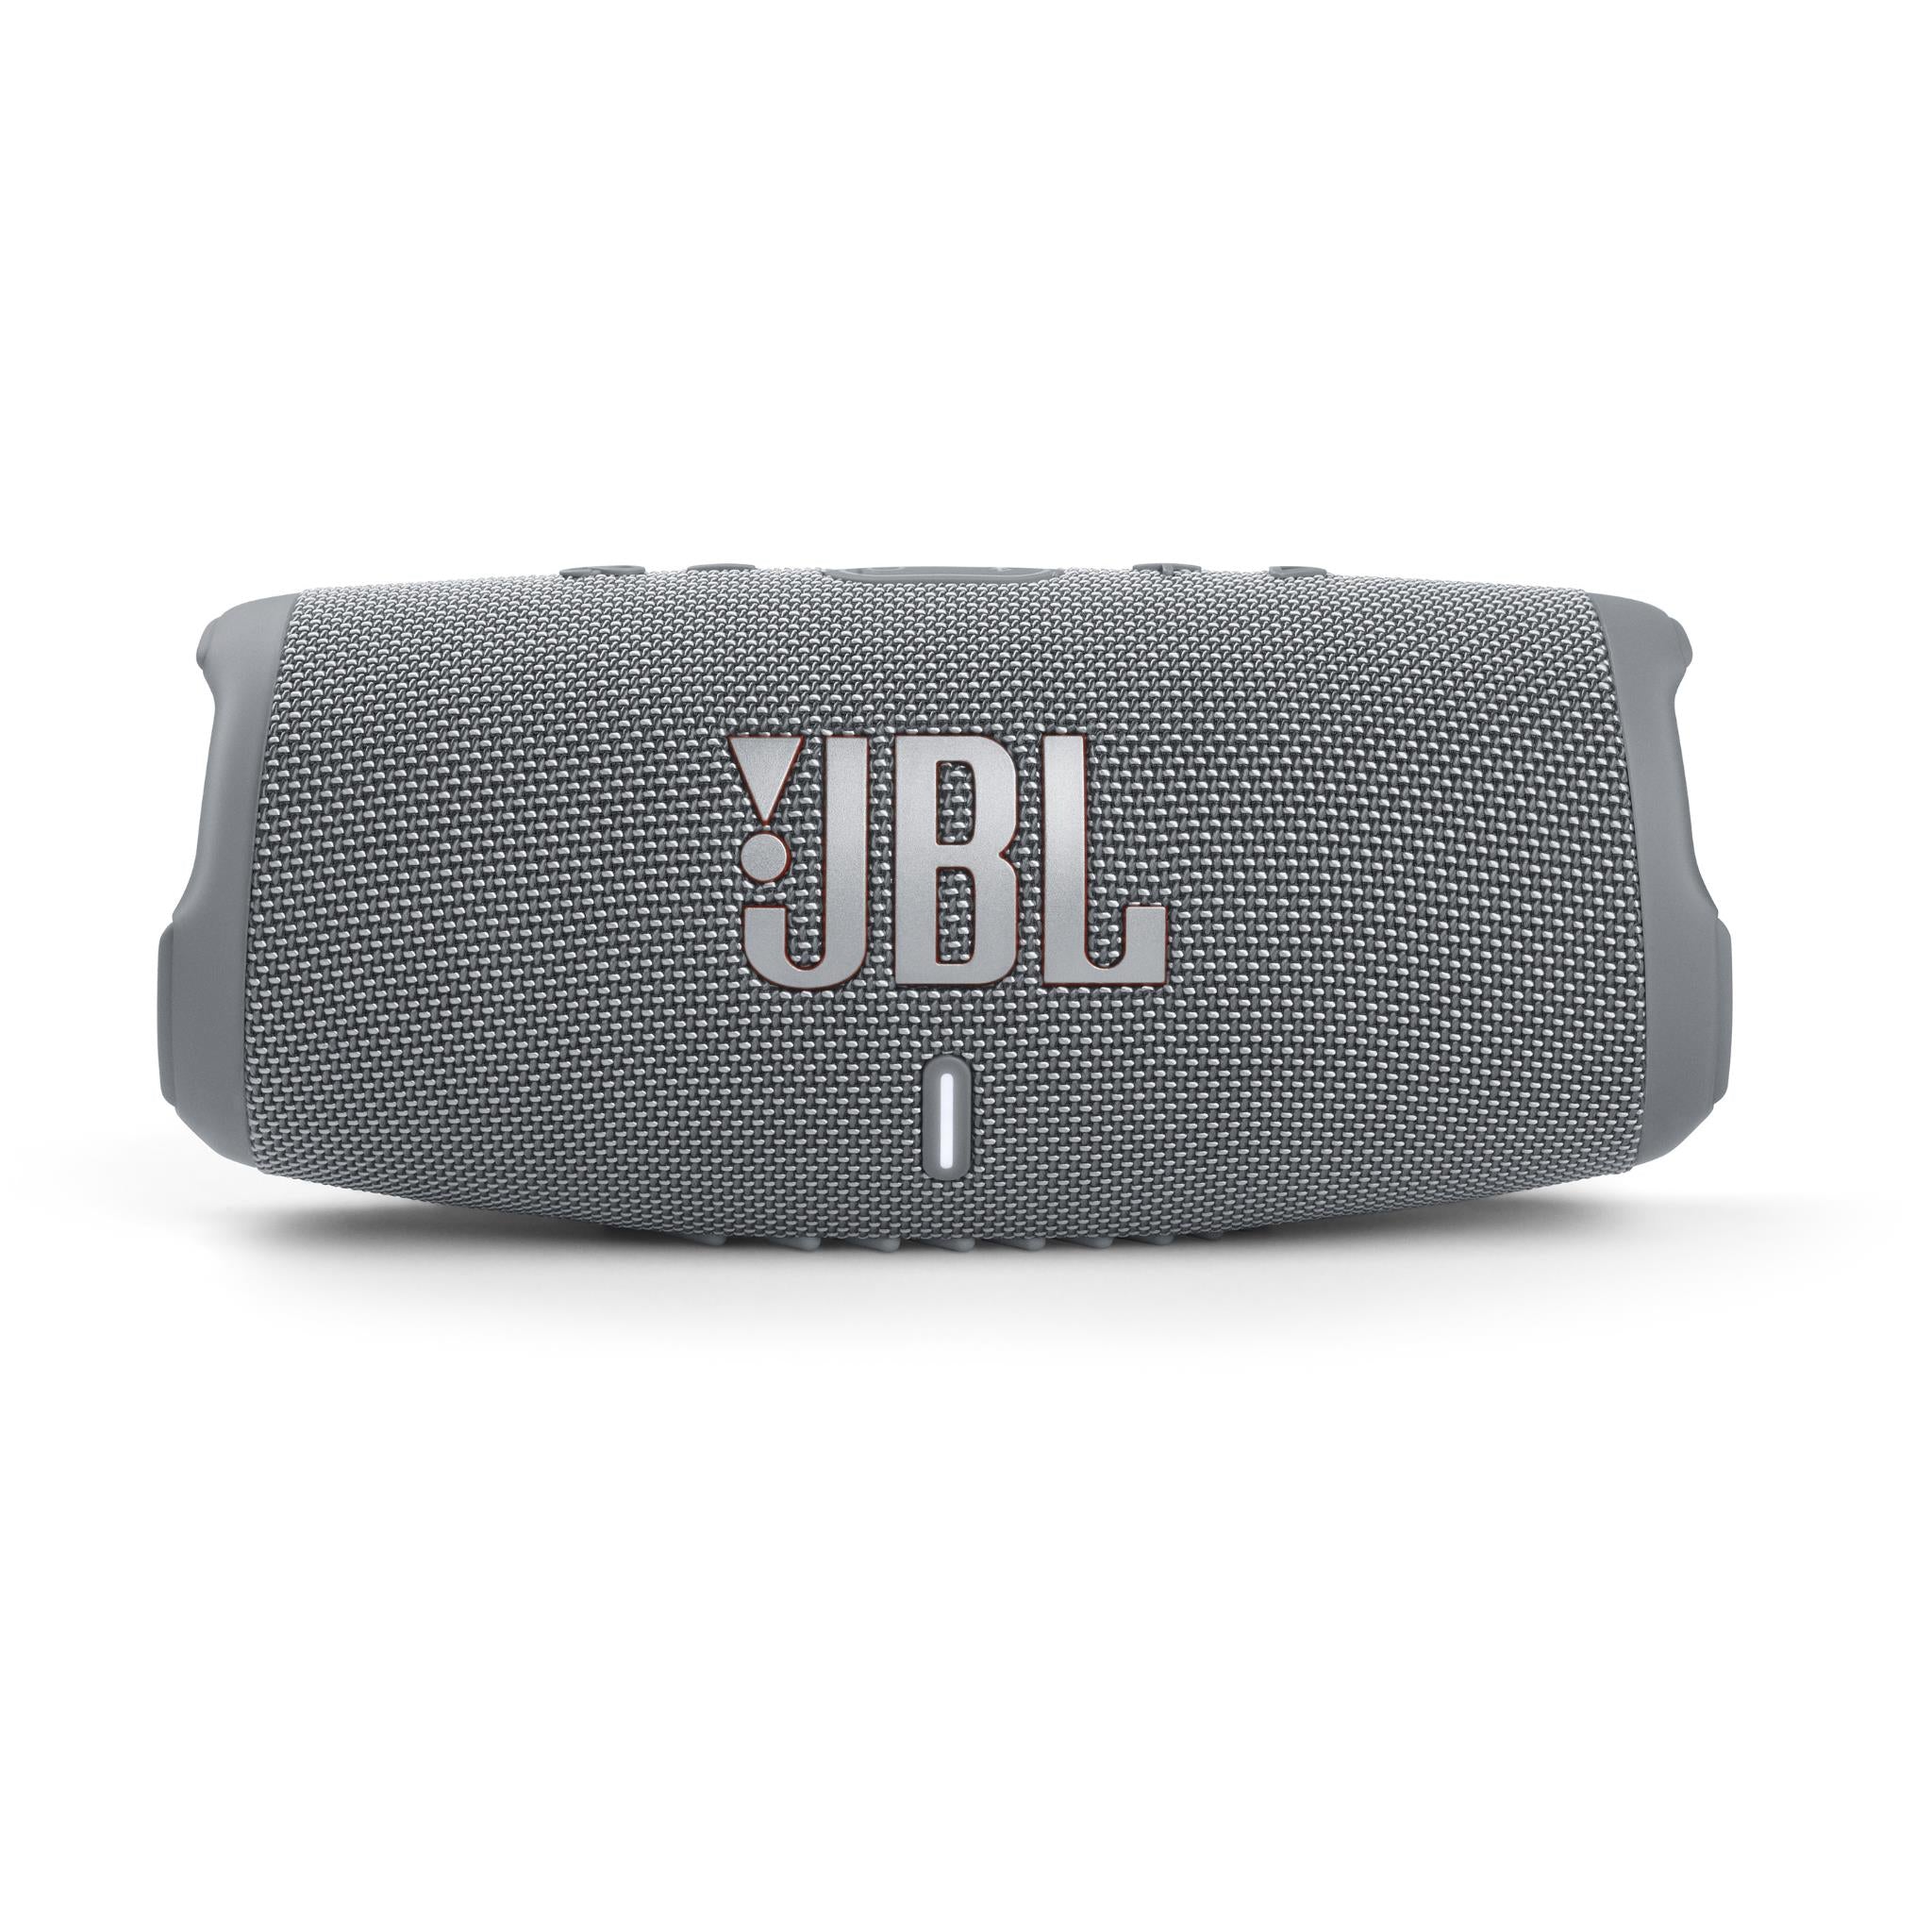 JBL portable speakers are up to 38 percent off right now